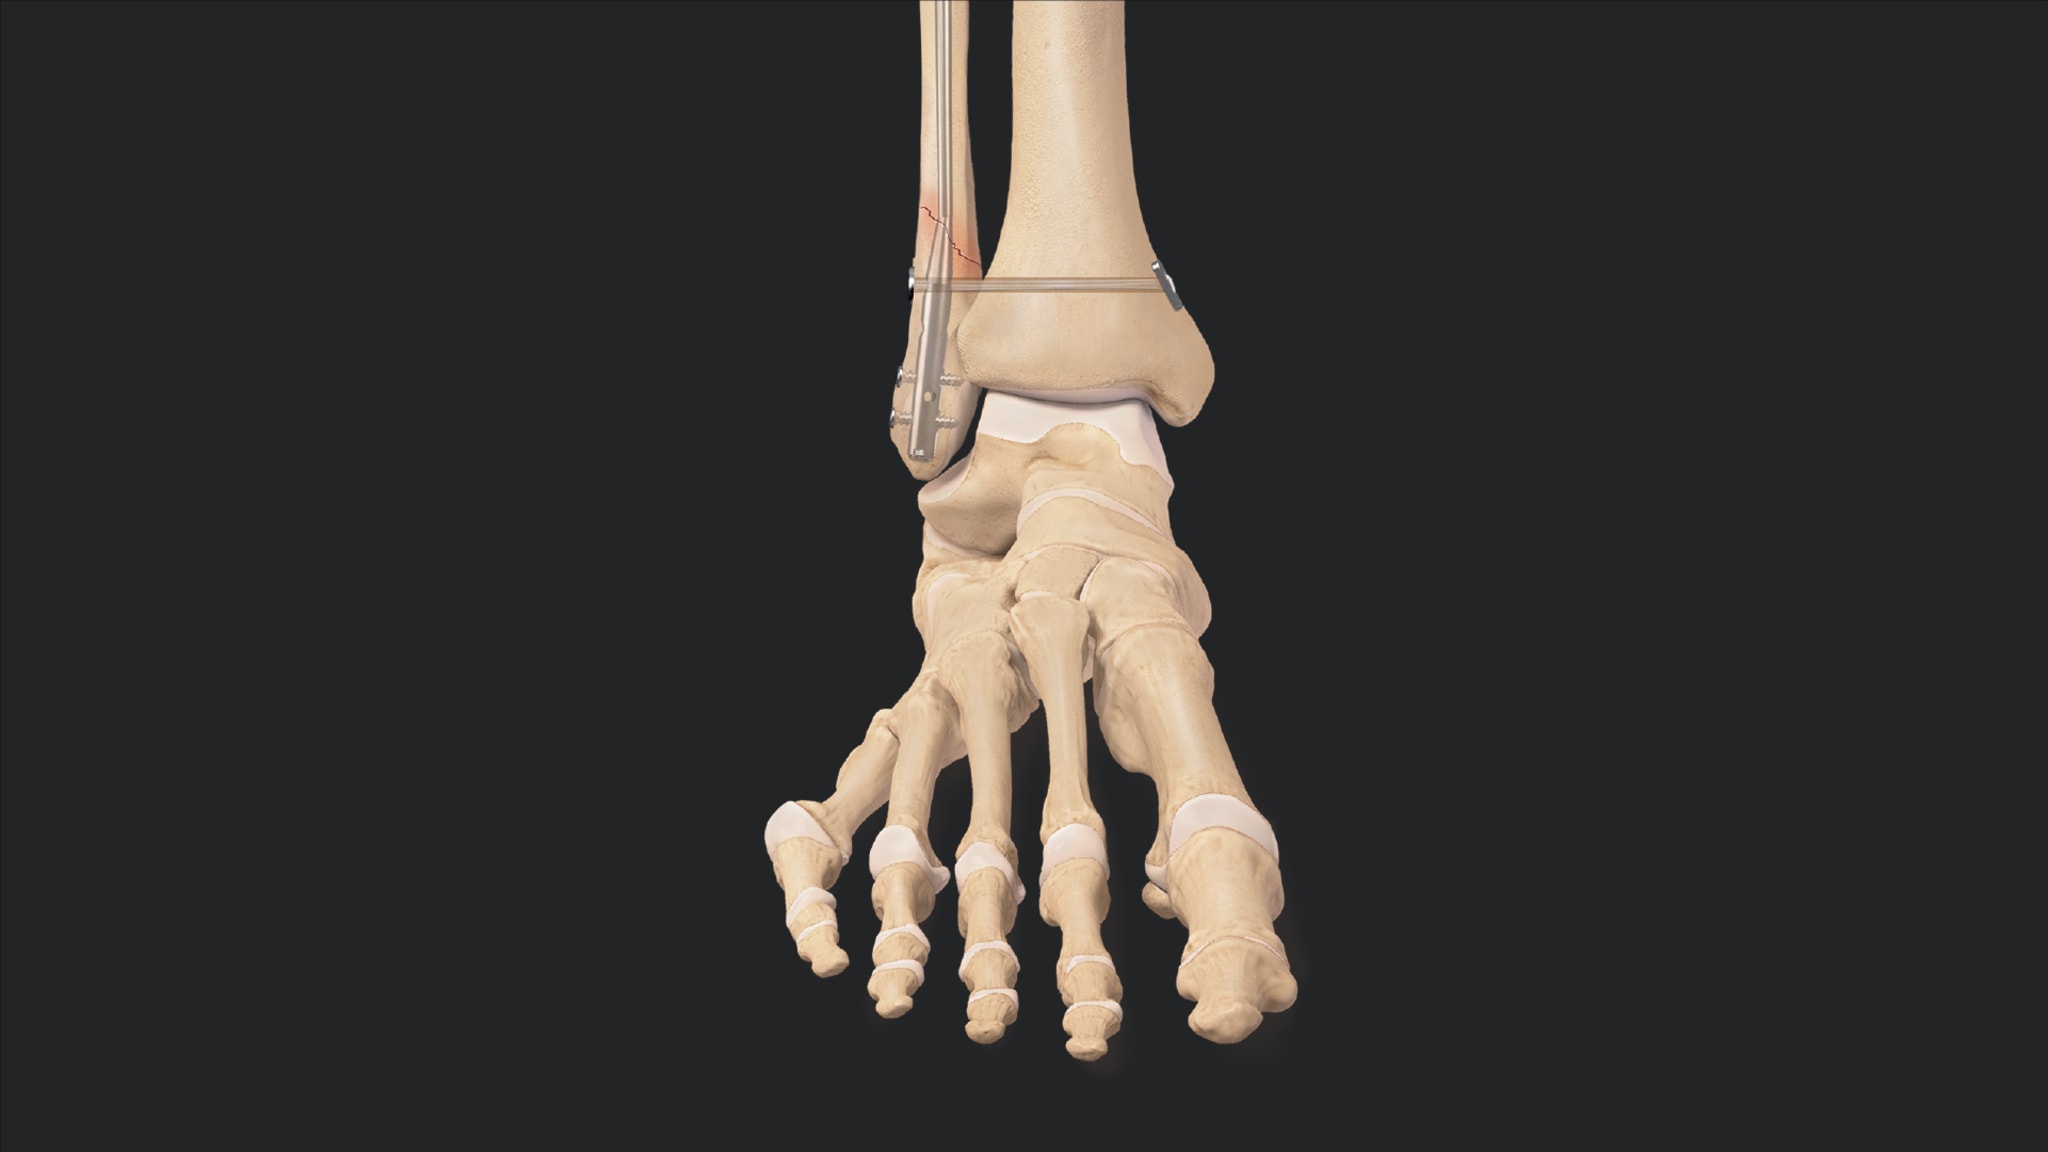 Ankle Fracture Revision Using a FibuLock® Nail and TightRope® XP Implants